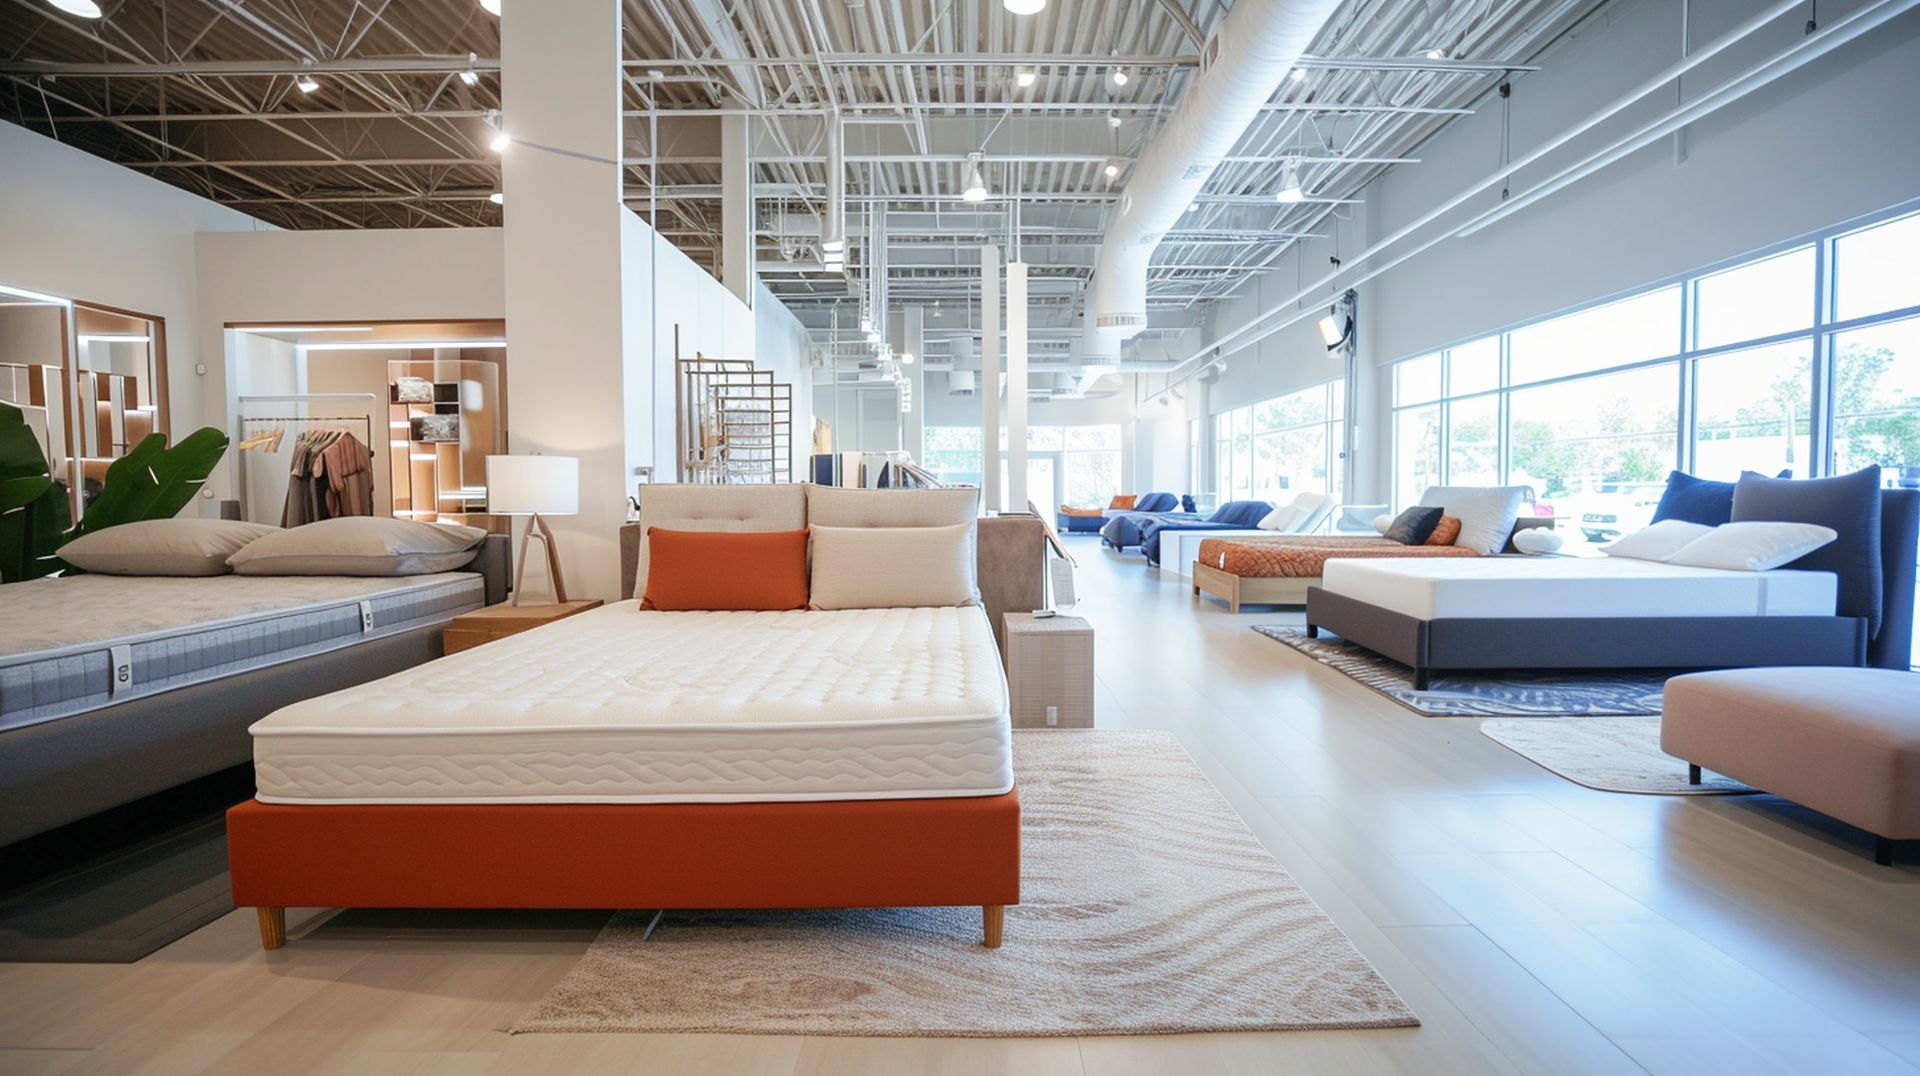 Local San Clemente mattress stores have the best prices, sales, and deals if you're looking for a new mattress in San Clemente